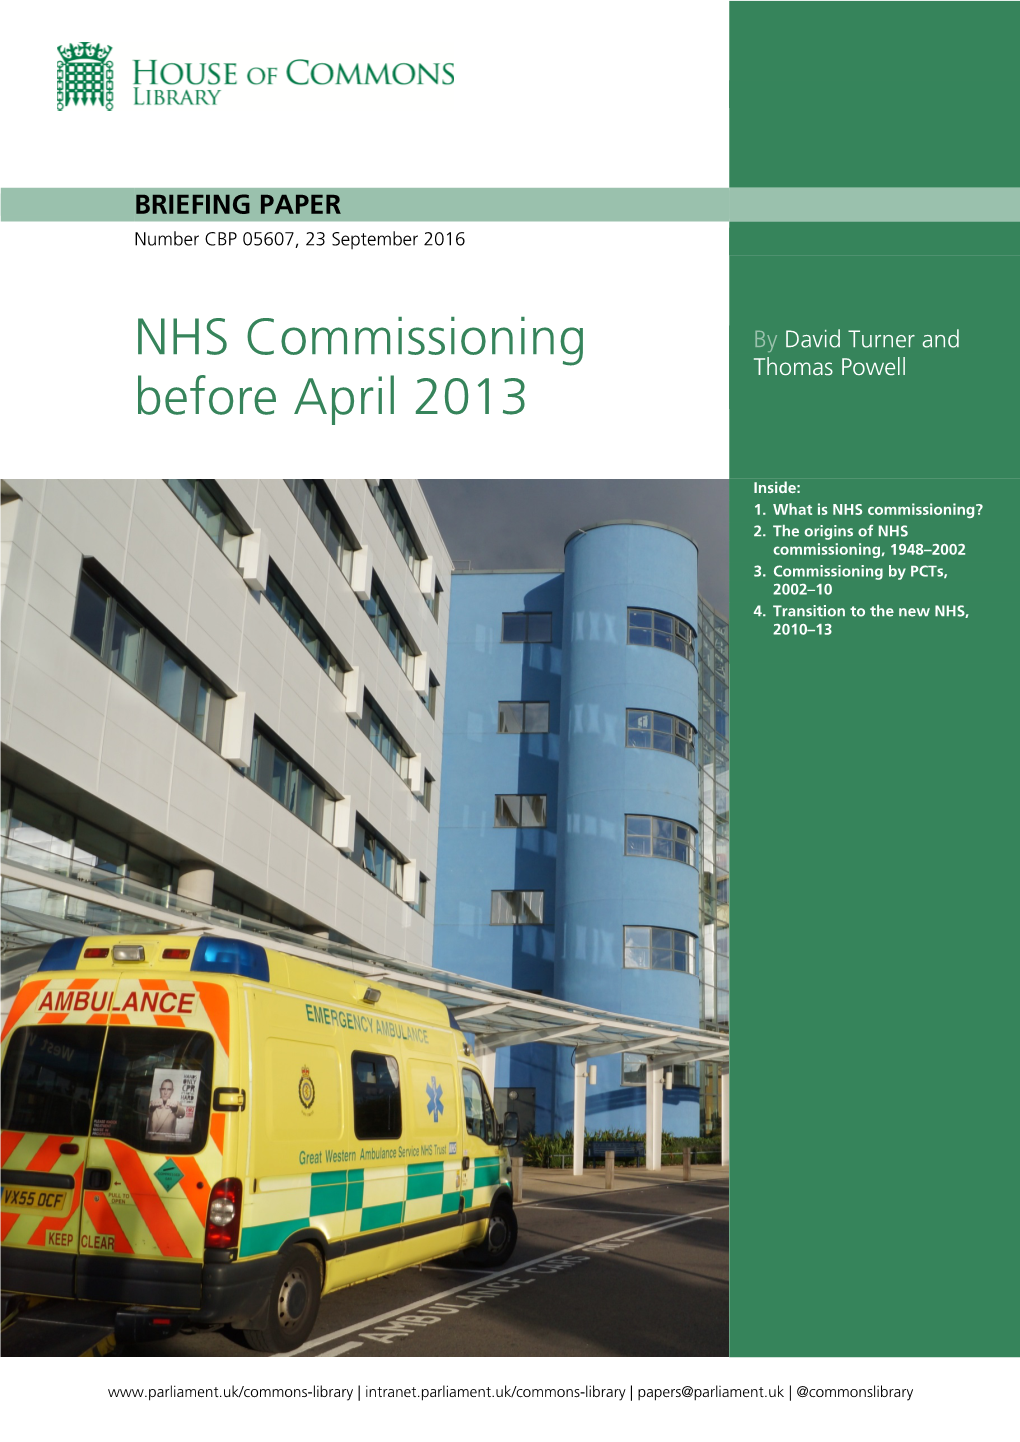 NHS Commissioning Before April 2013